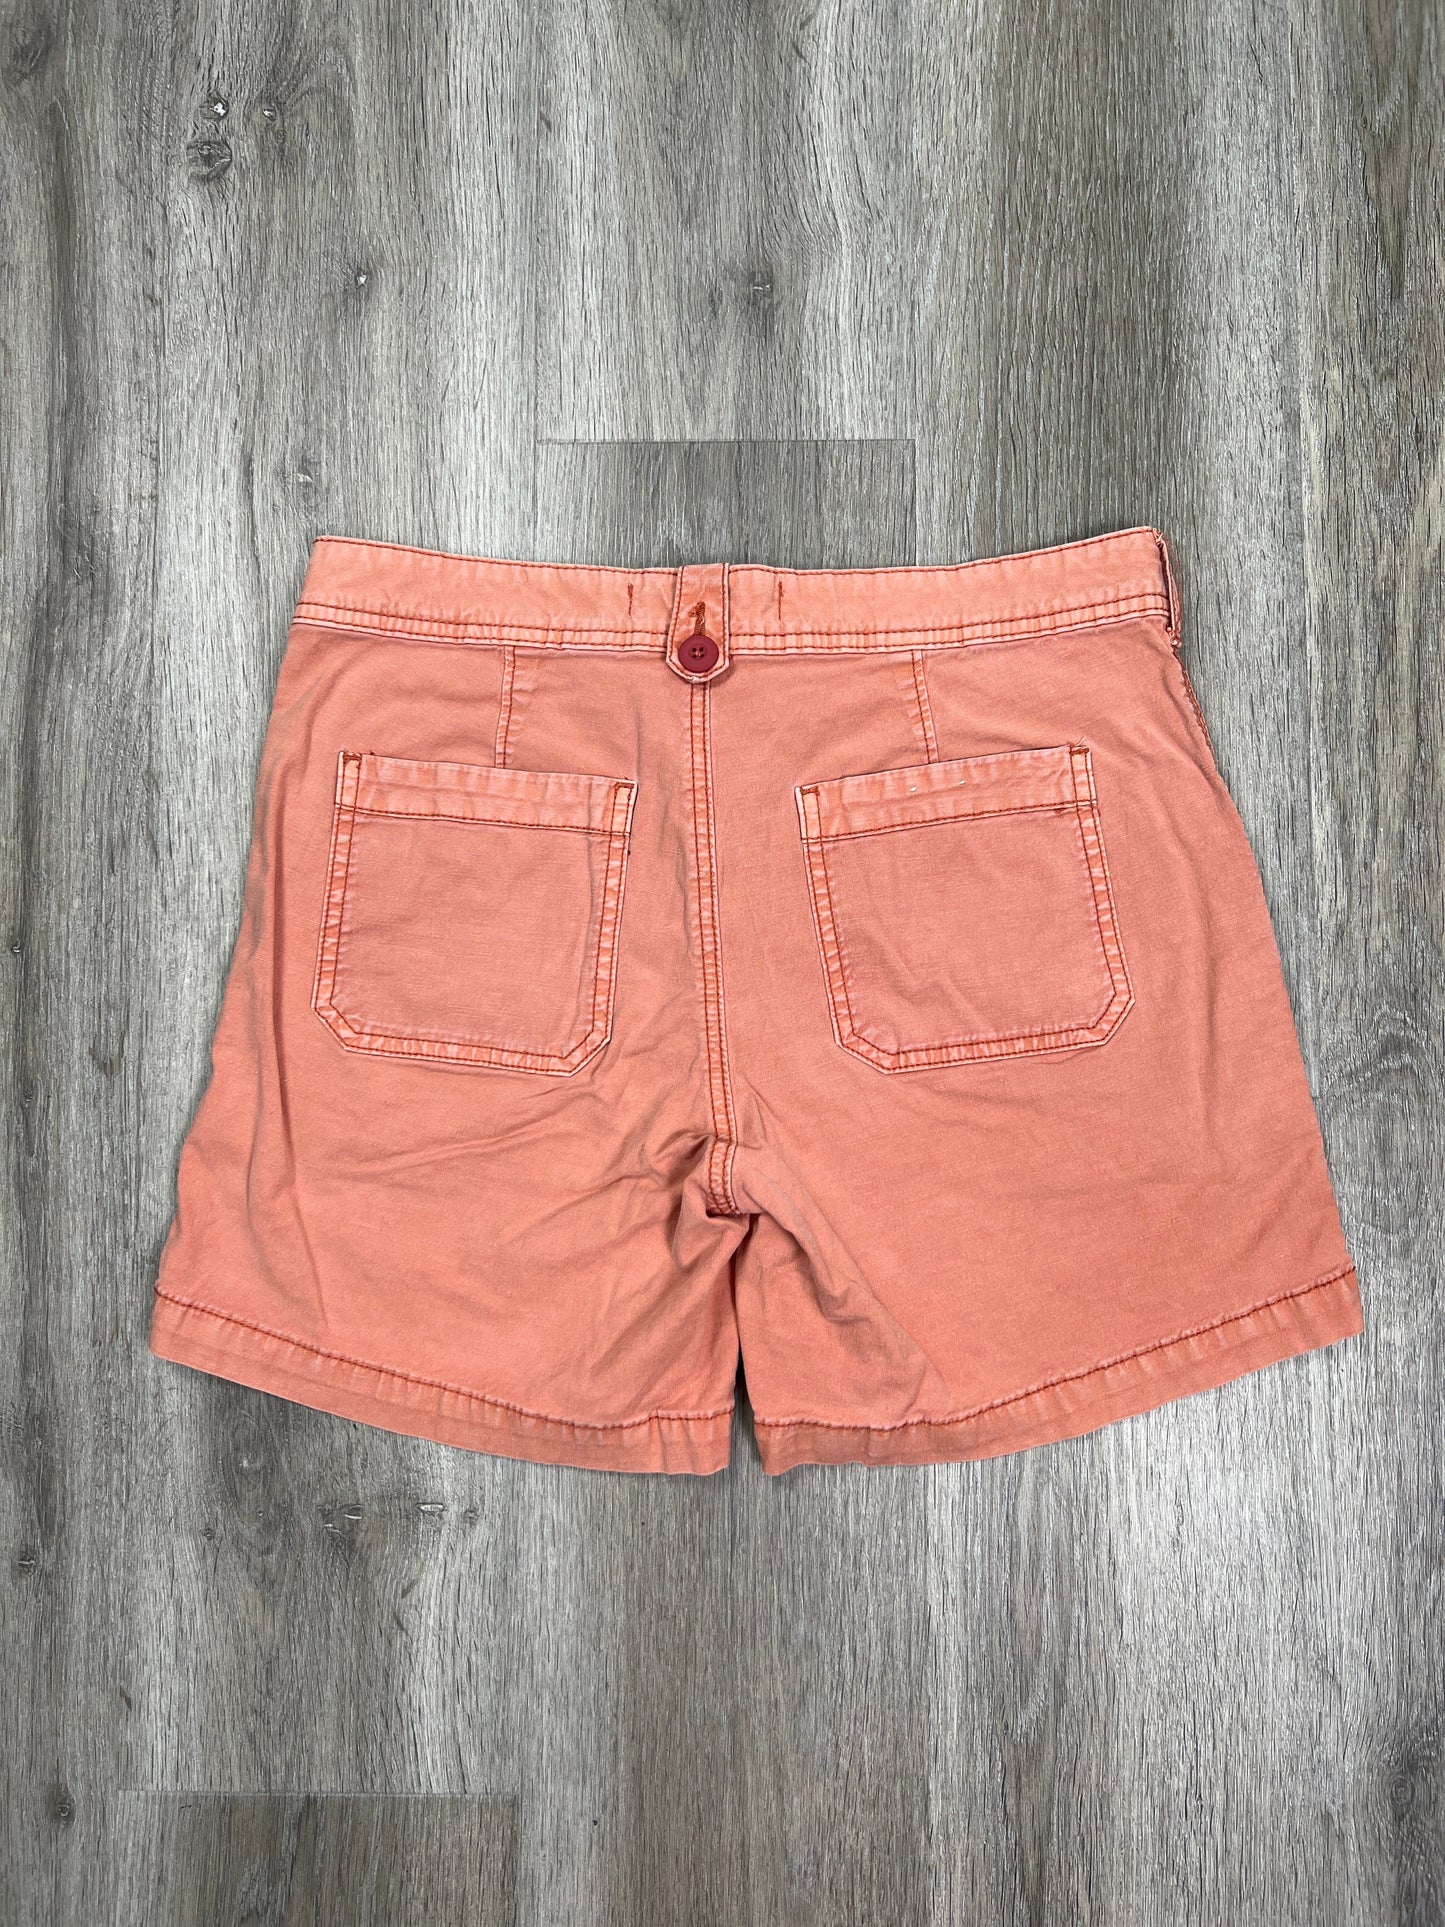 Coral Shorts Anthropologie, Size S